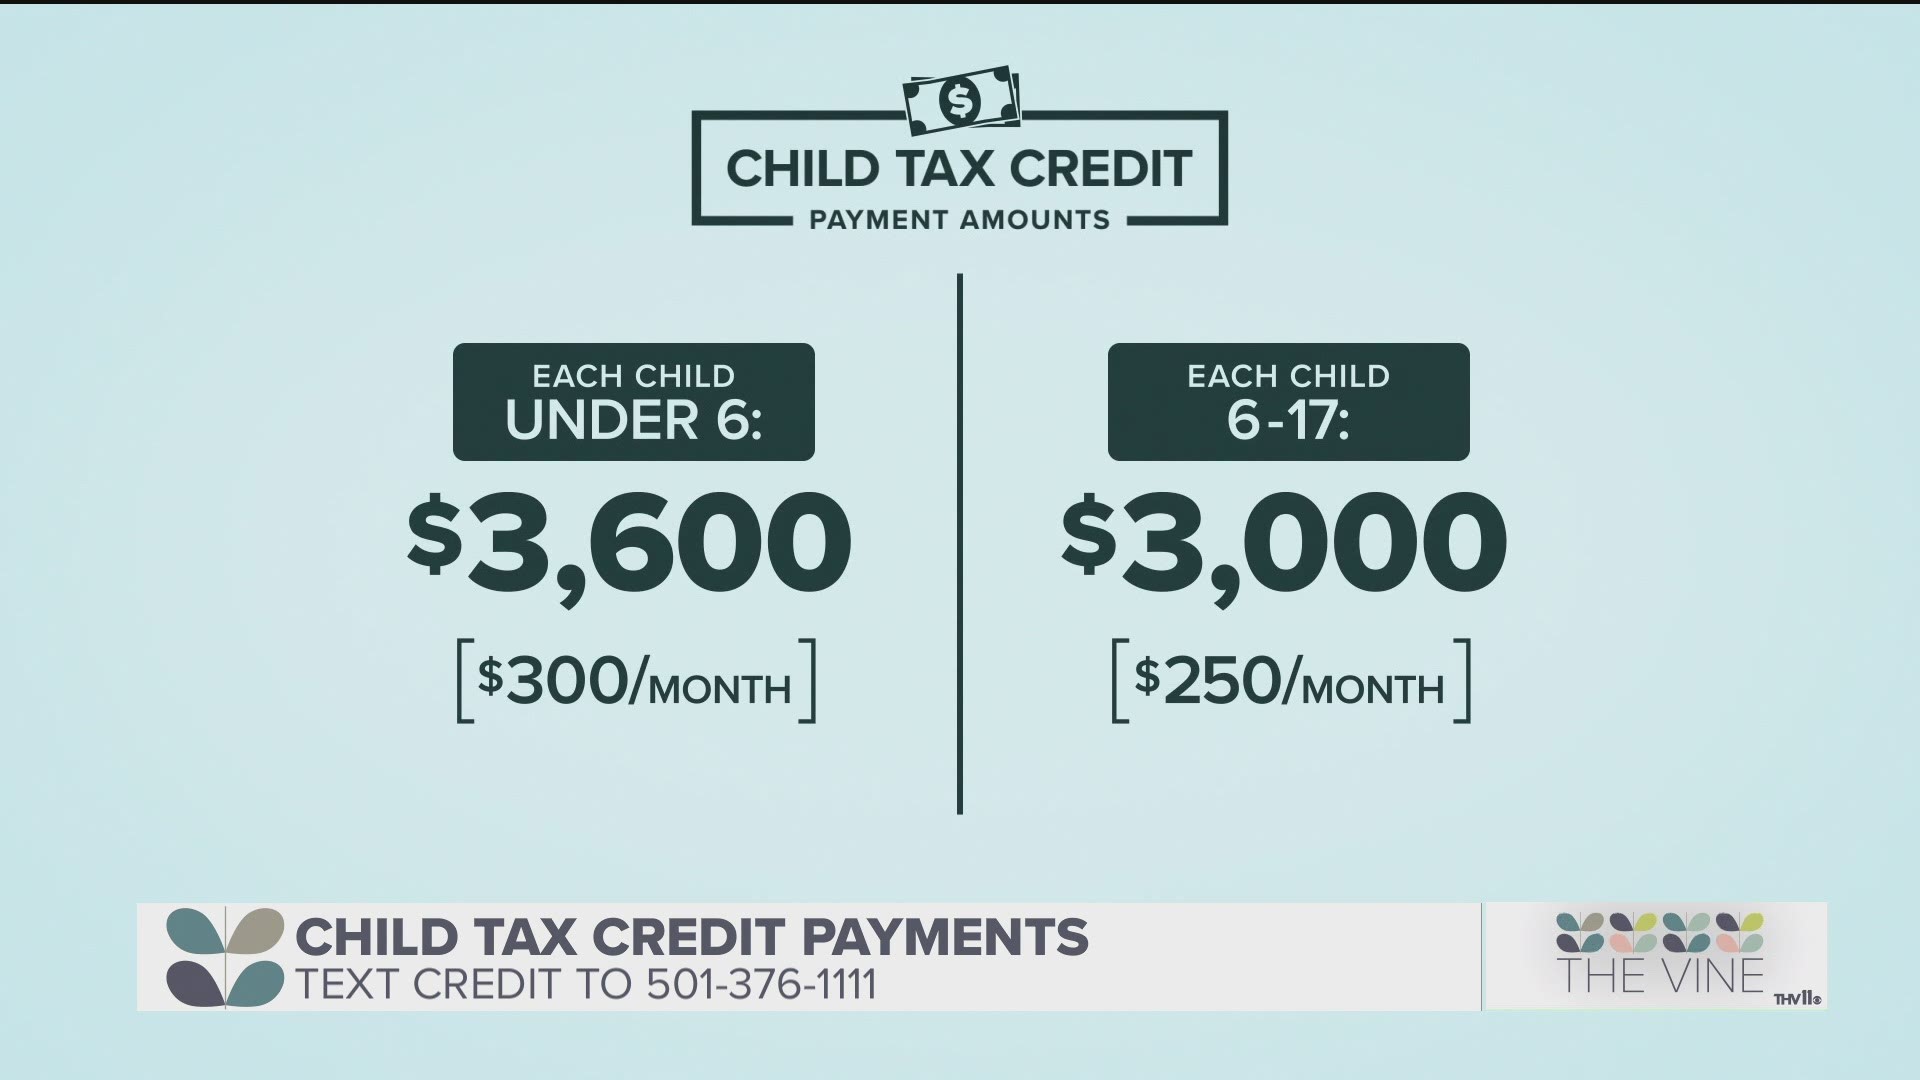 Child tax credit payments start going out today. But who's eligible and how will they work? Hana Williams explains.